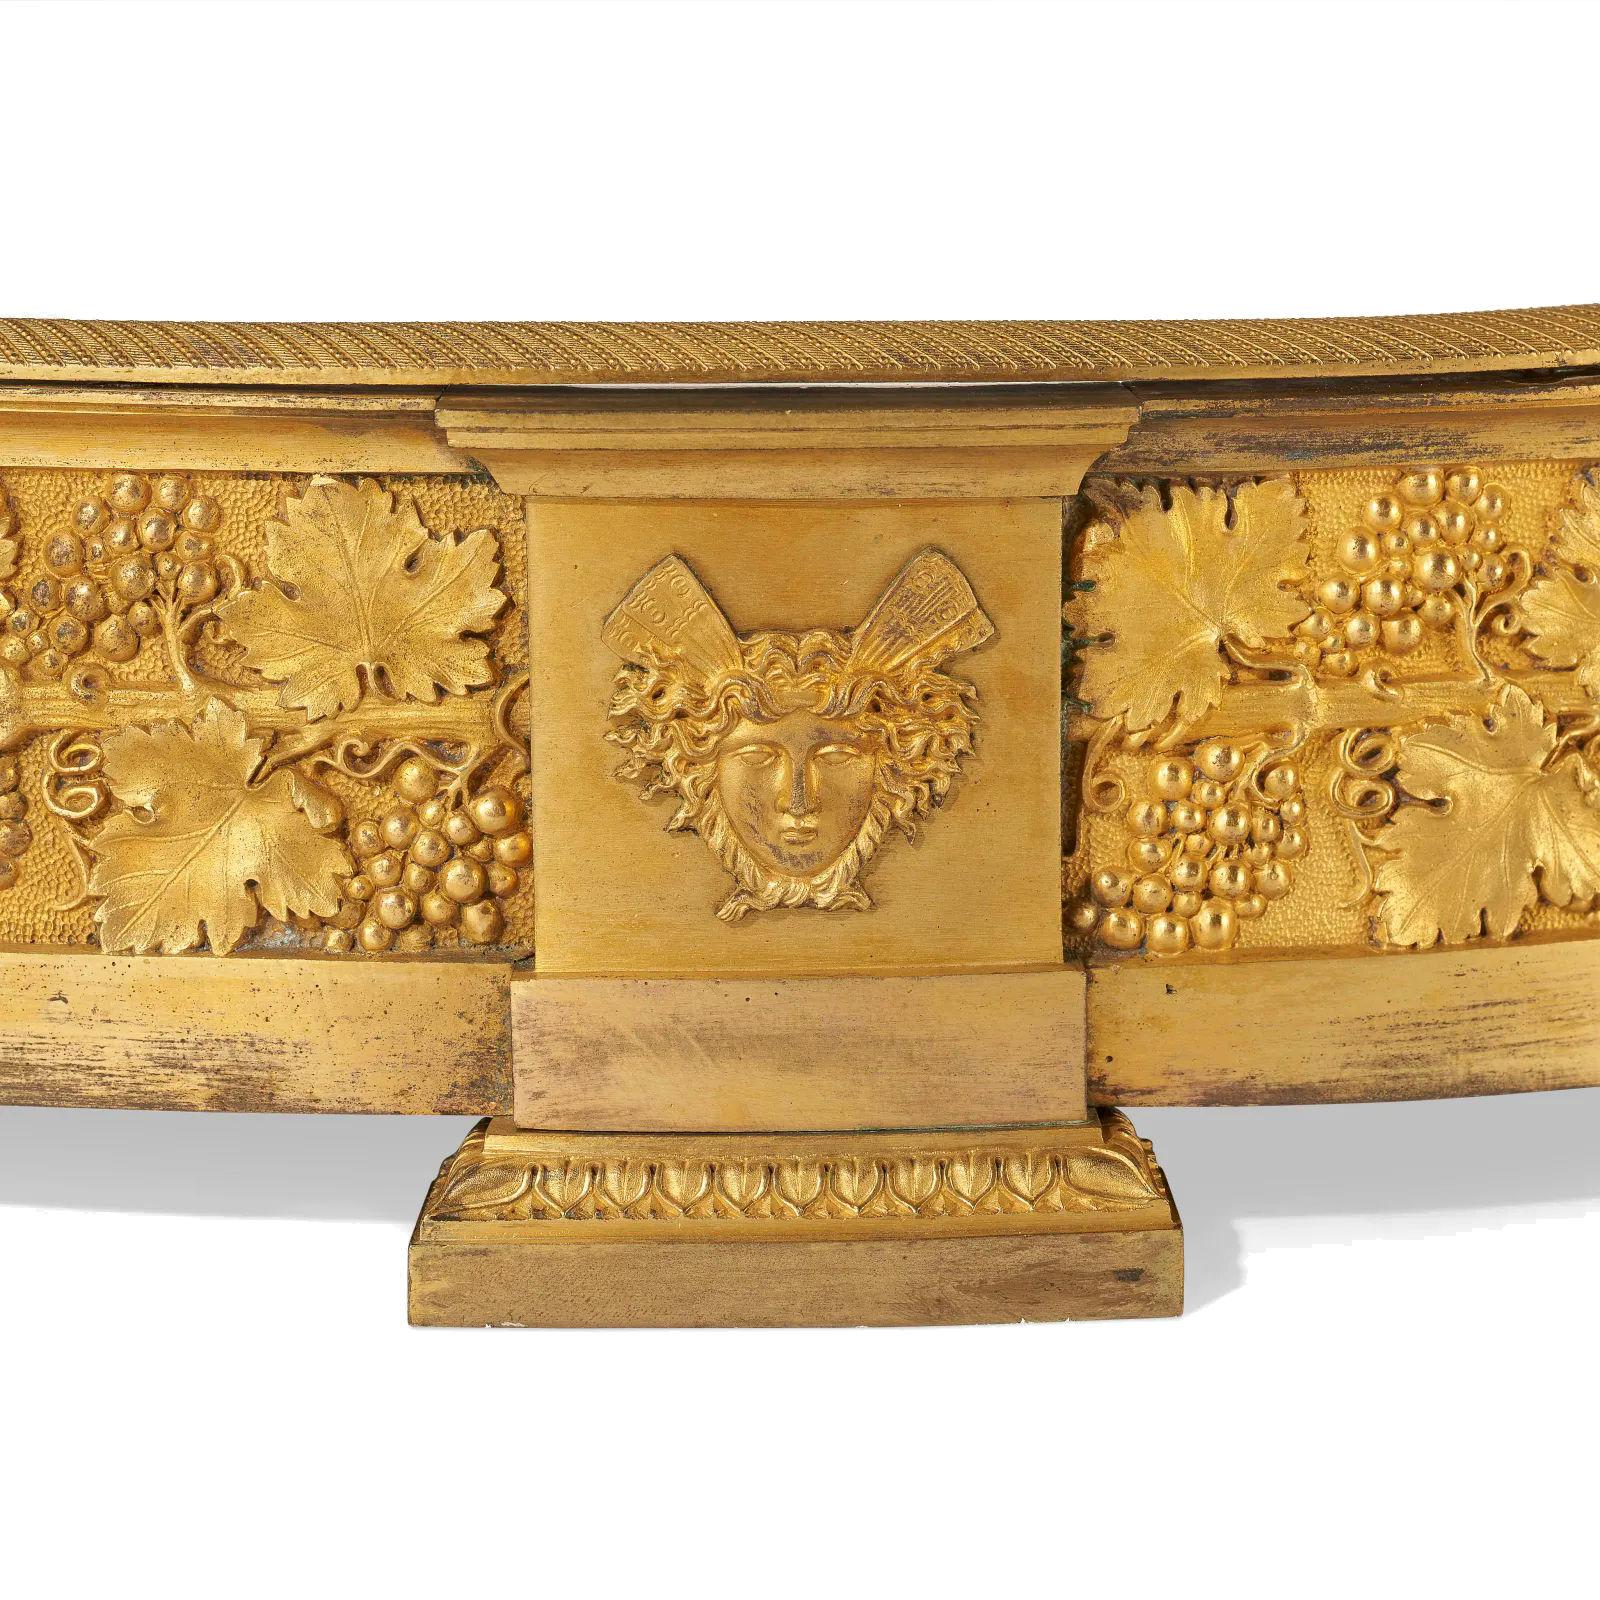 Finest quality and very large early 19 century French 1st Empire period ormolu bronze four section surtout de table.
   